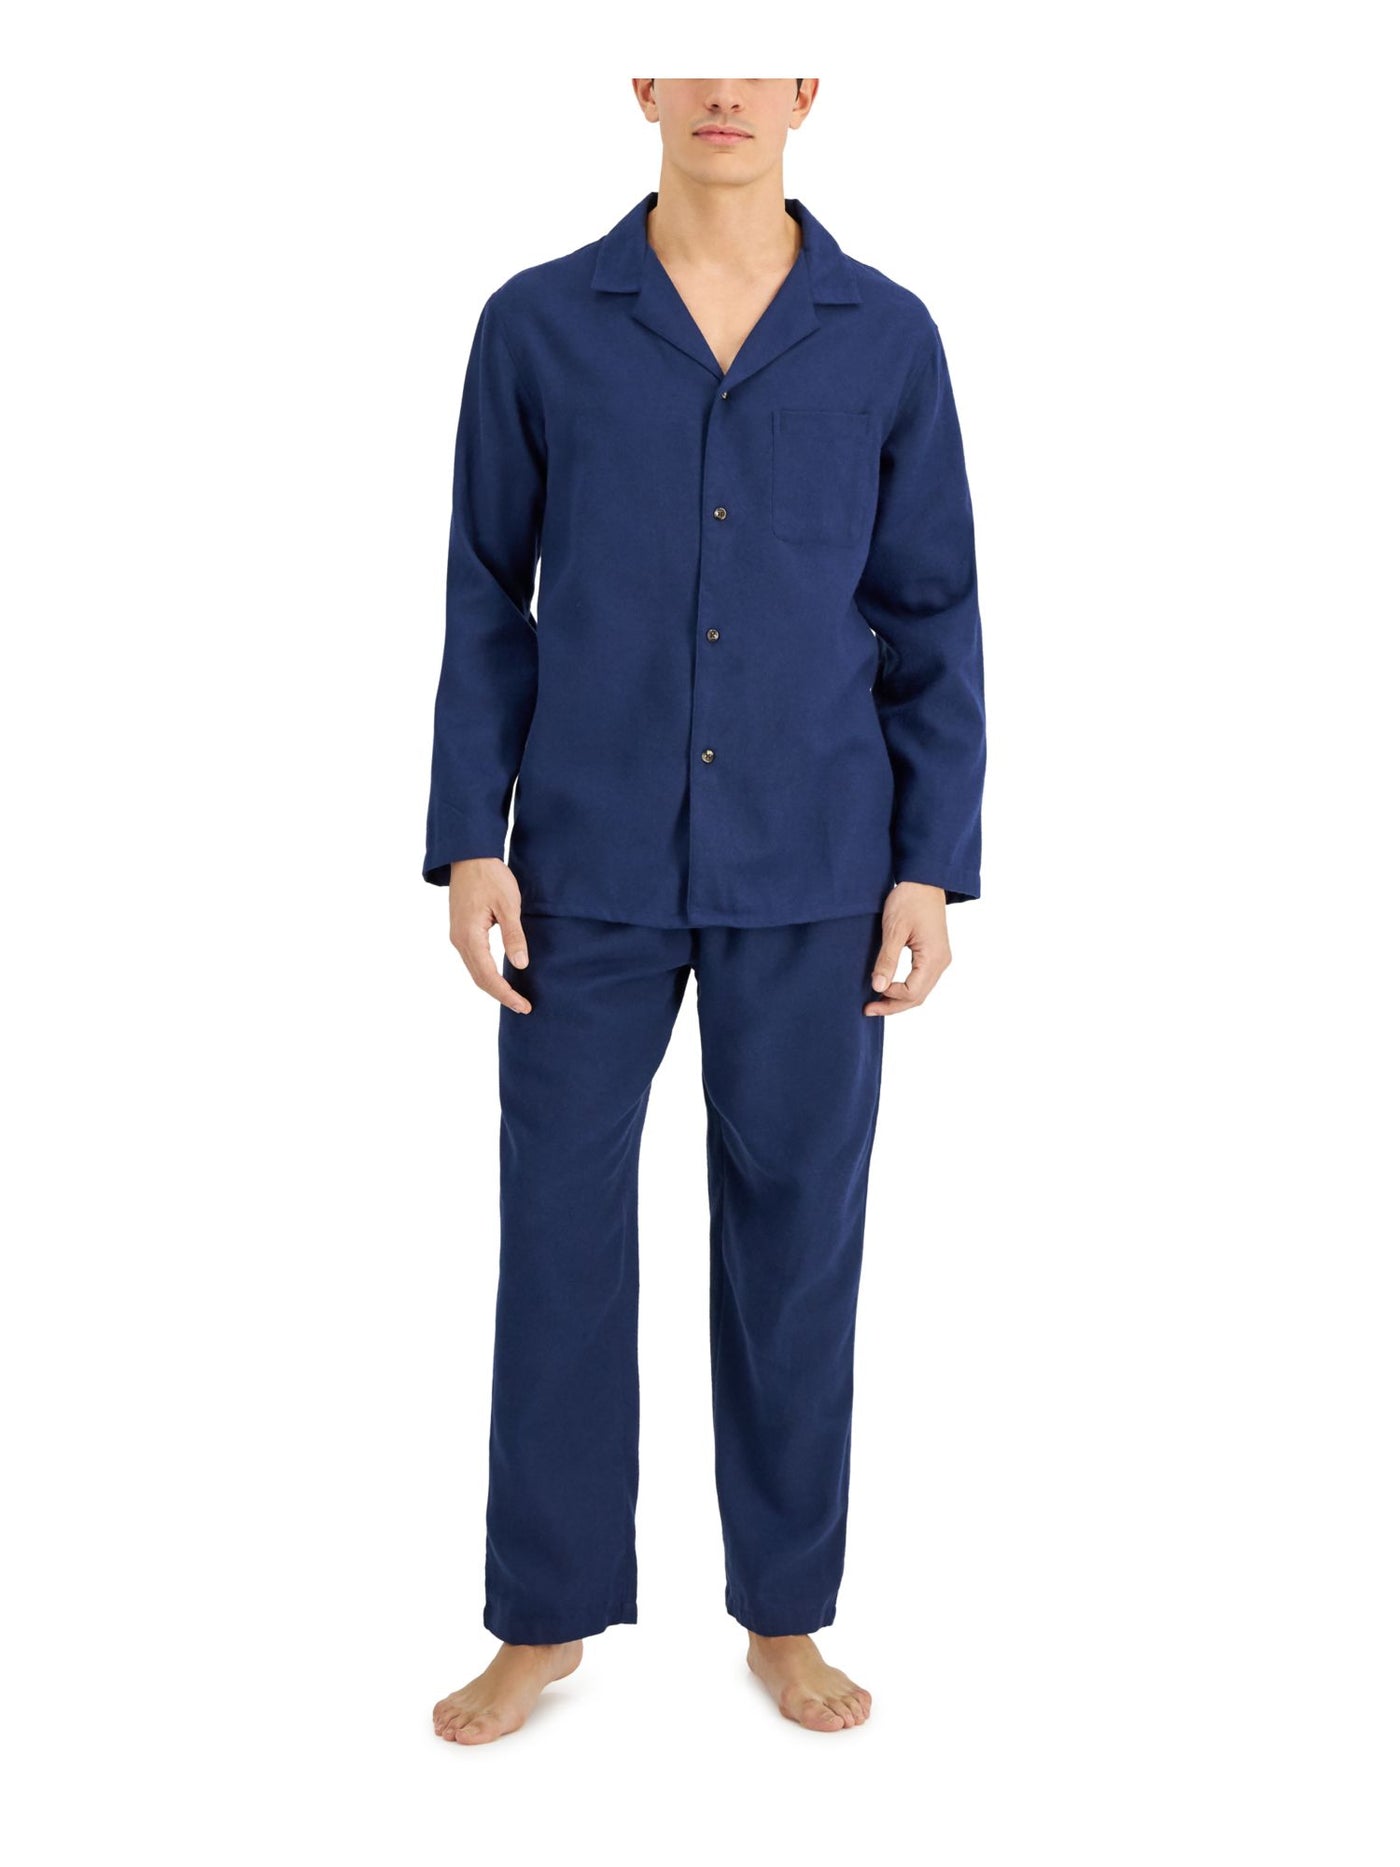 CLUBROOM Mens Navy Notched Collar Long Sleeve Button Up Top Straight leg Pants Pajamas L